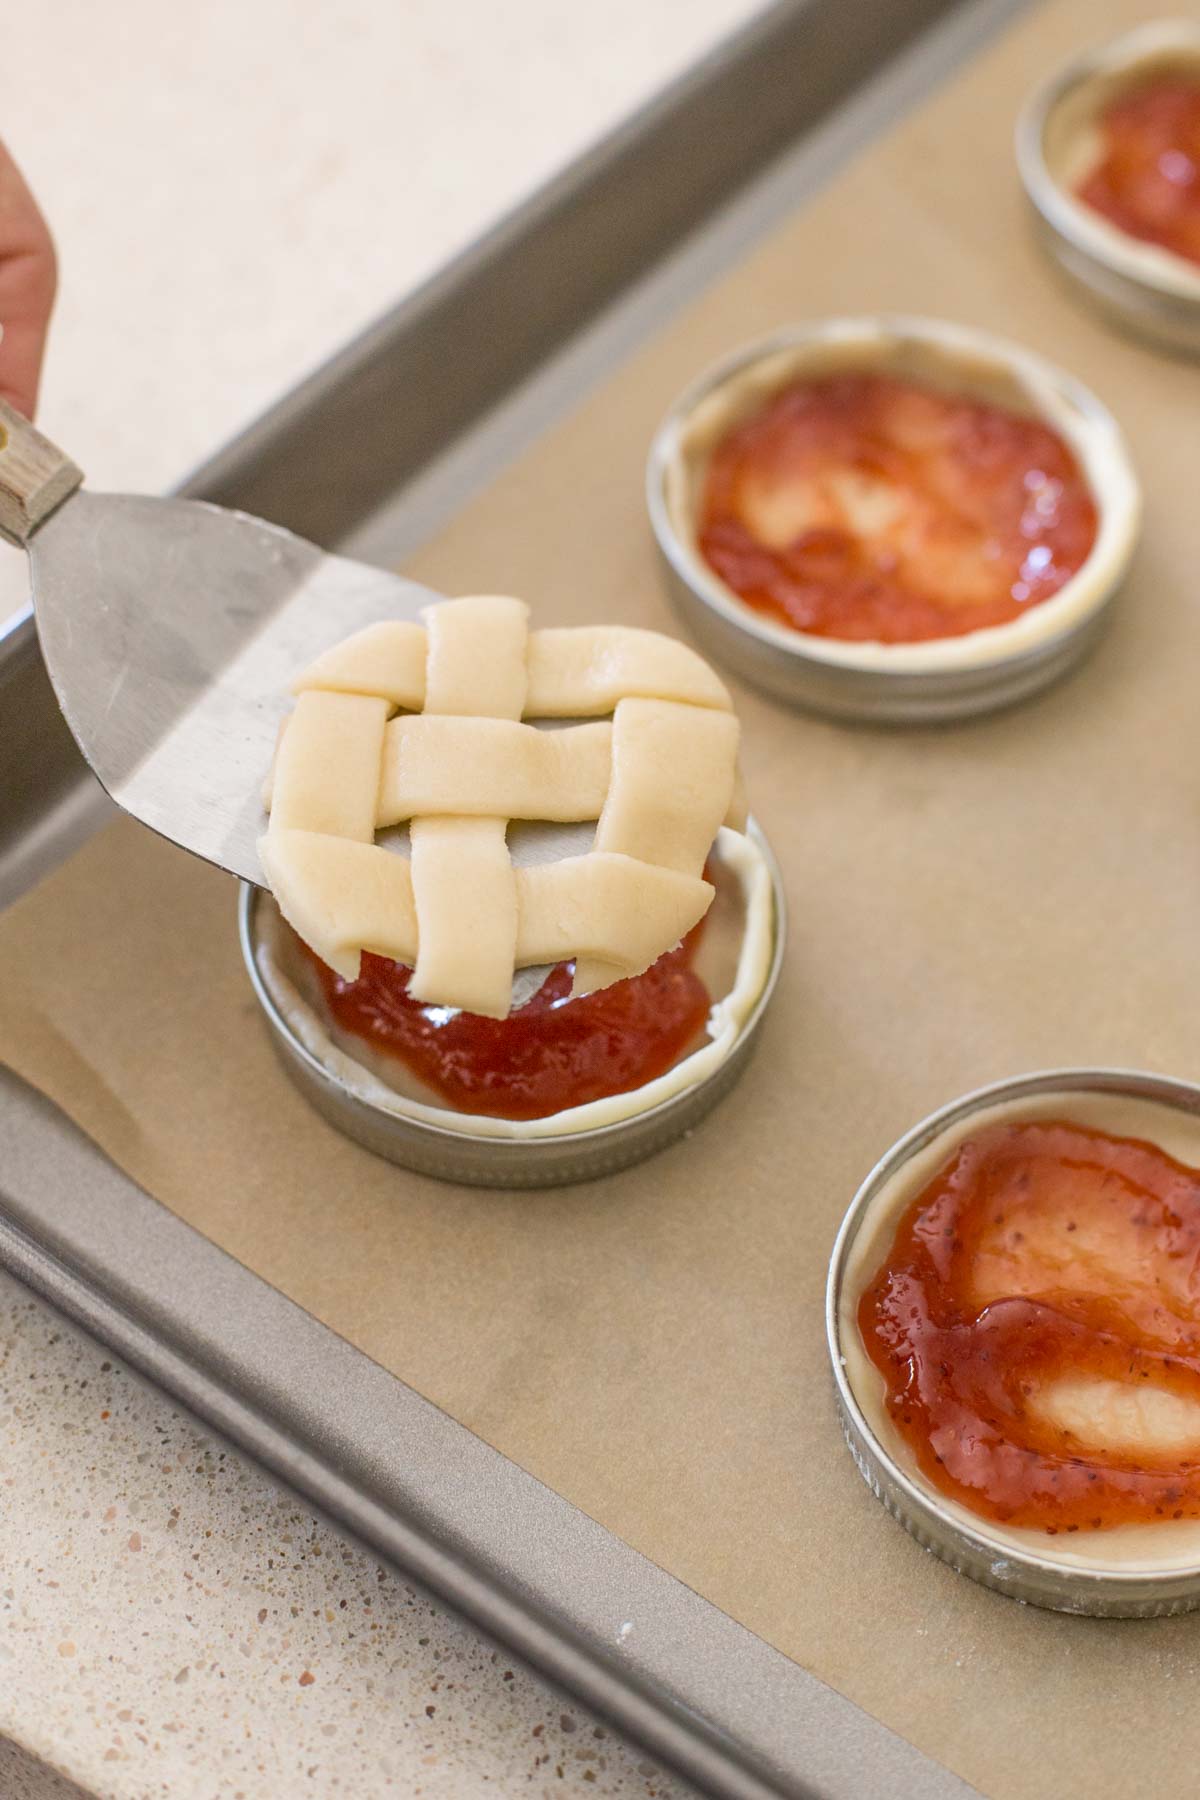 Mason jar lids arranged on a parchment paper lined baking sheet, with the pie dough and strawberry filling in them, and a metal spatula being used to transfer the circle lattice top onto the top of the pie.